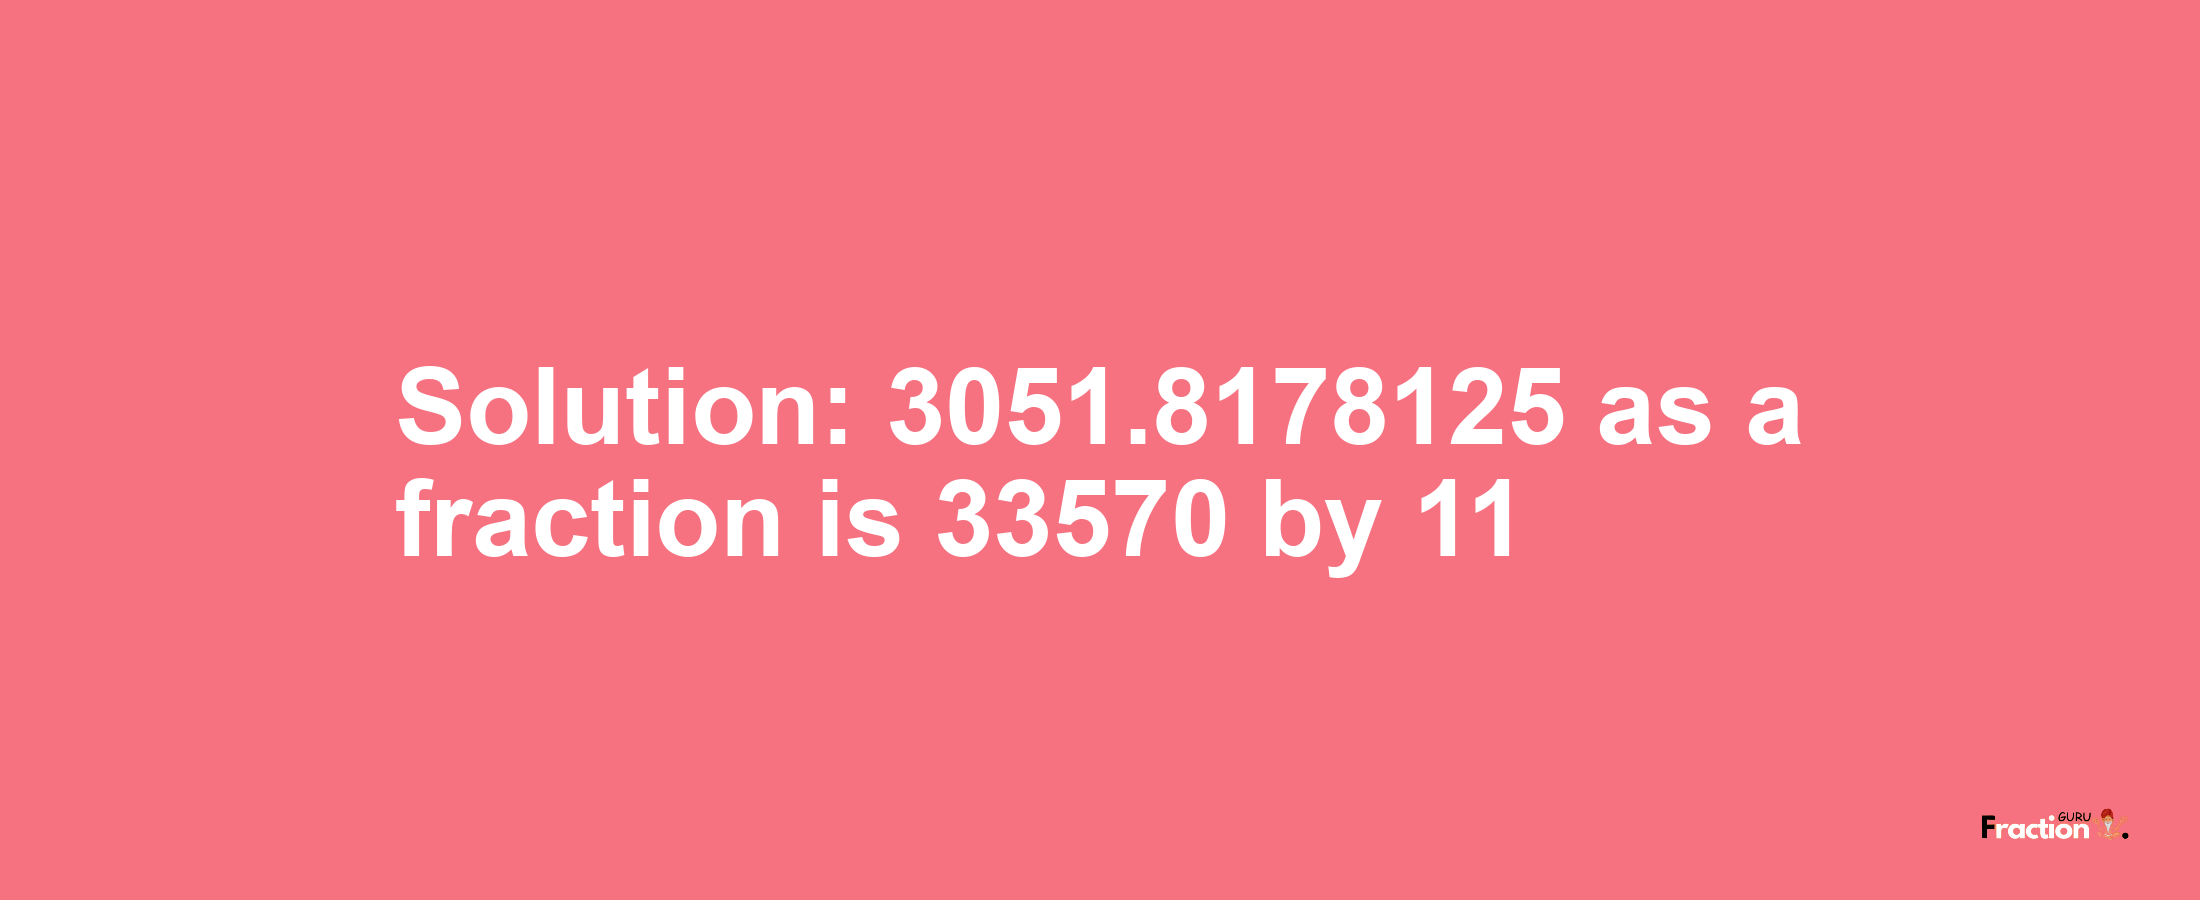 Solution:3051.8178125 as a fraction is 33570/11